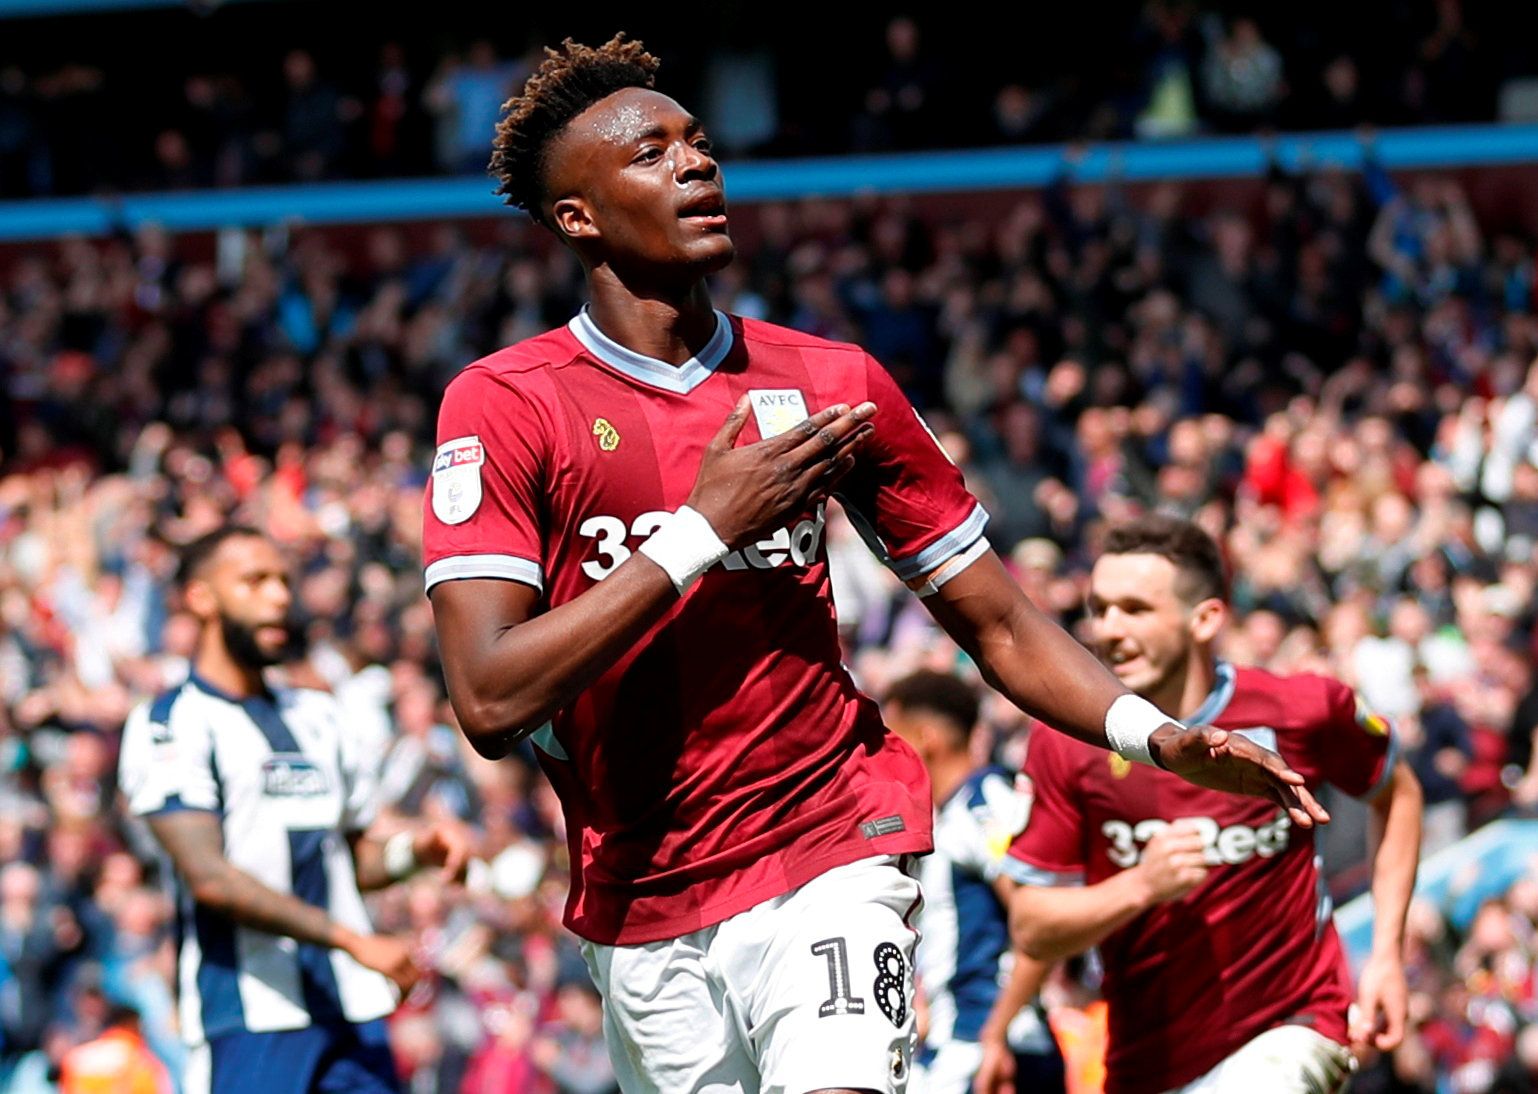 Soccer Football - Championship Play-Off Semi Final First Leg - Aston Villa v West Bromwich Albion - Villa Park, Birmingham, Britain - May 11, 2019  Aston Villa's Tammy Abraham celebrates scoring their second goal              Action Images via Reuters/Matthew Childs  EDITORIAL USE ONLY. No use with unauthorized audio, video, data, fixture lists, club/league logos or 